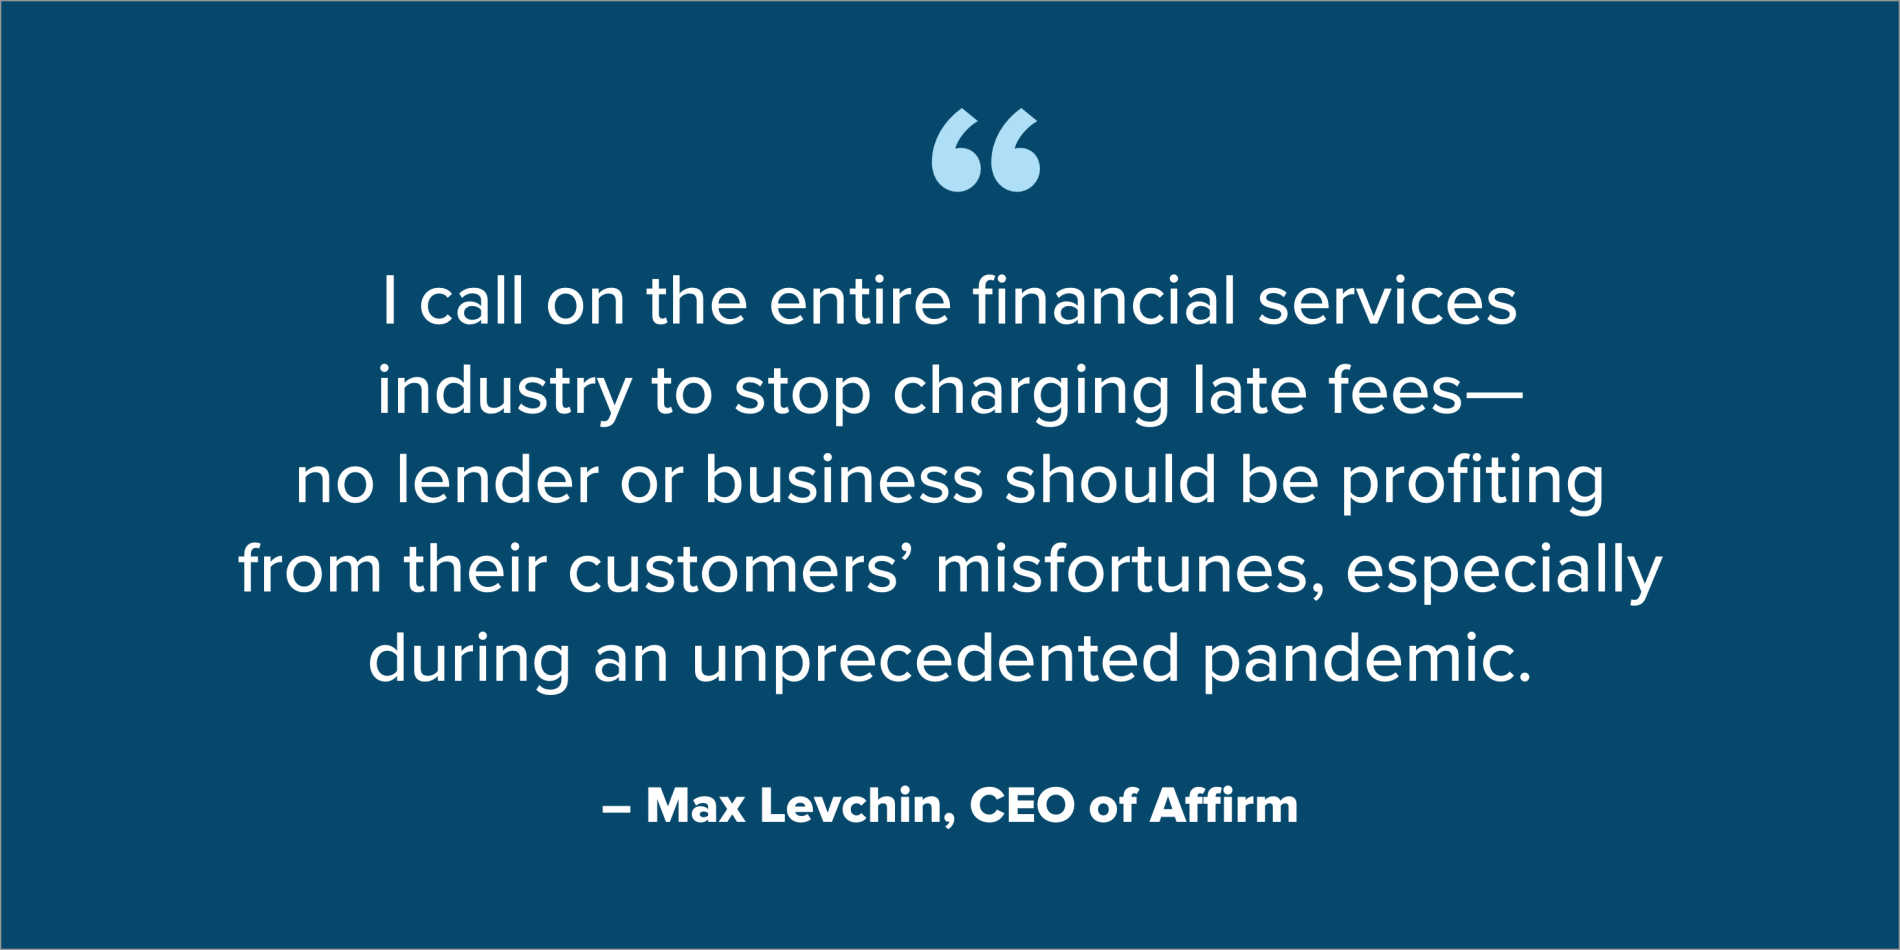 Quote from Affirm CEO Max Levchin urging all financial institutions to halt charging late fees